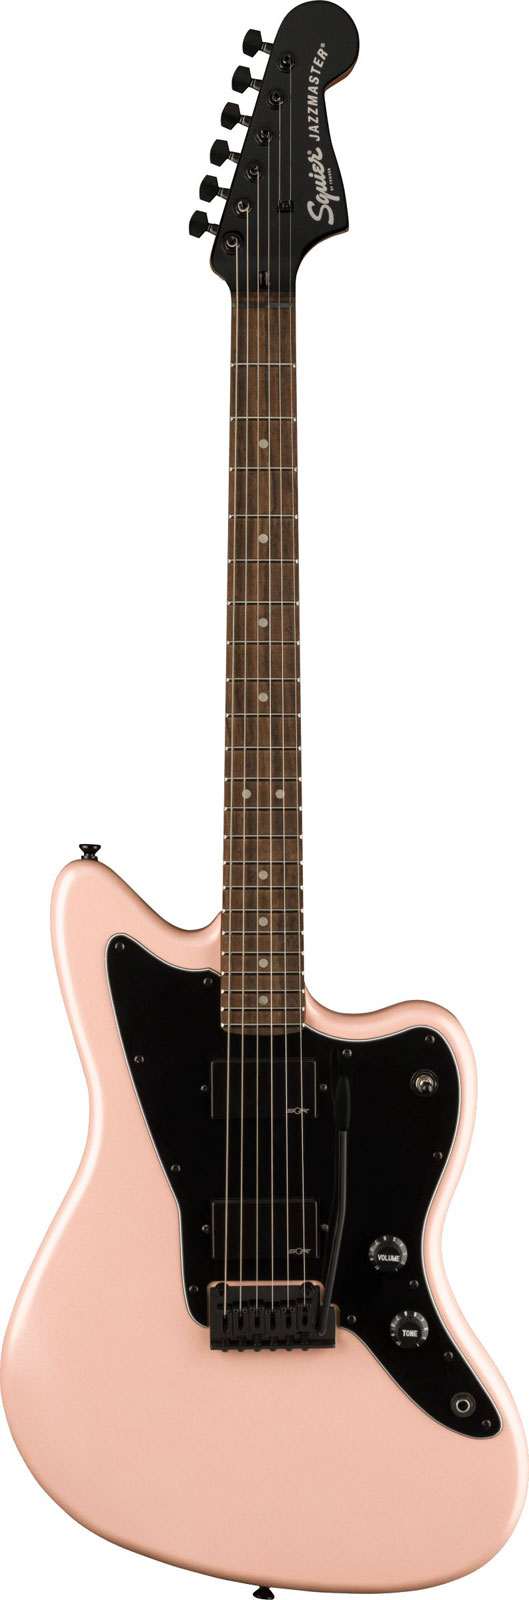 SQUIER JAZZMASTER HH CONTEMPORARY LRL SHELL PINK PEARL